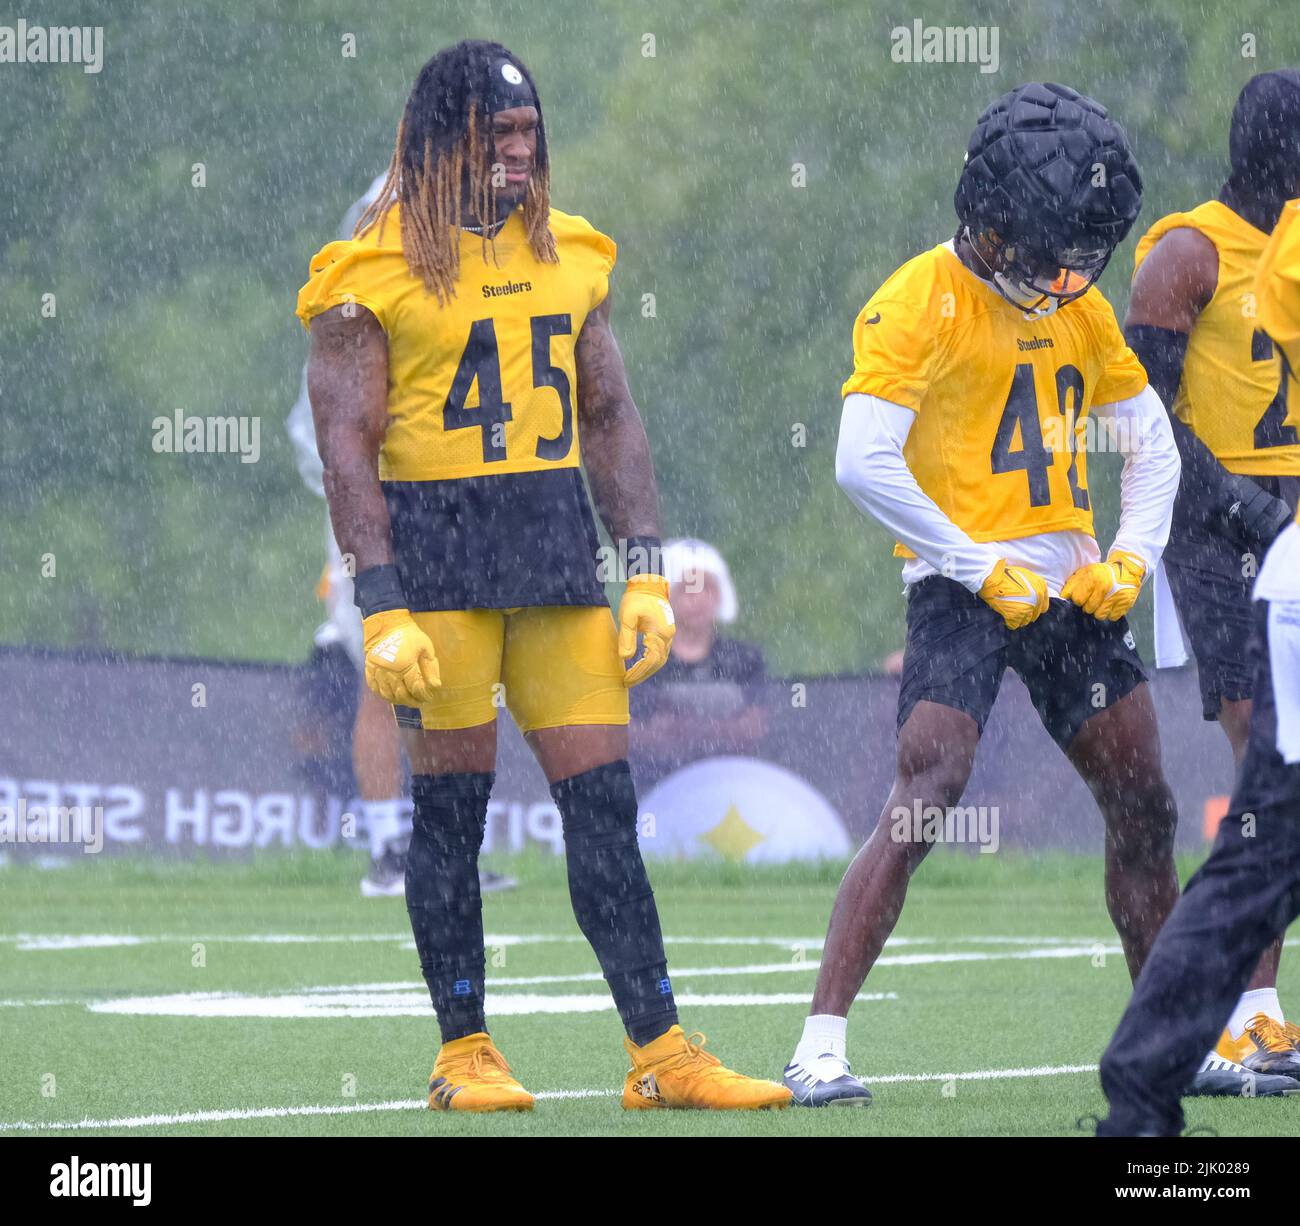 Latrobe, PA, USA. 28th July, 2022. July 28th, 2022: Buddy Johnson #45  during the Pittsburgh Steelers Training Camp in Latrobe, PA. Mike J.  Allen/BMR (Credit Image: © Mike J. Allen/BMR via ZUMA